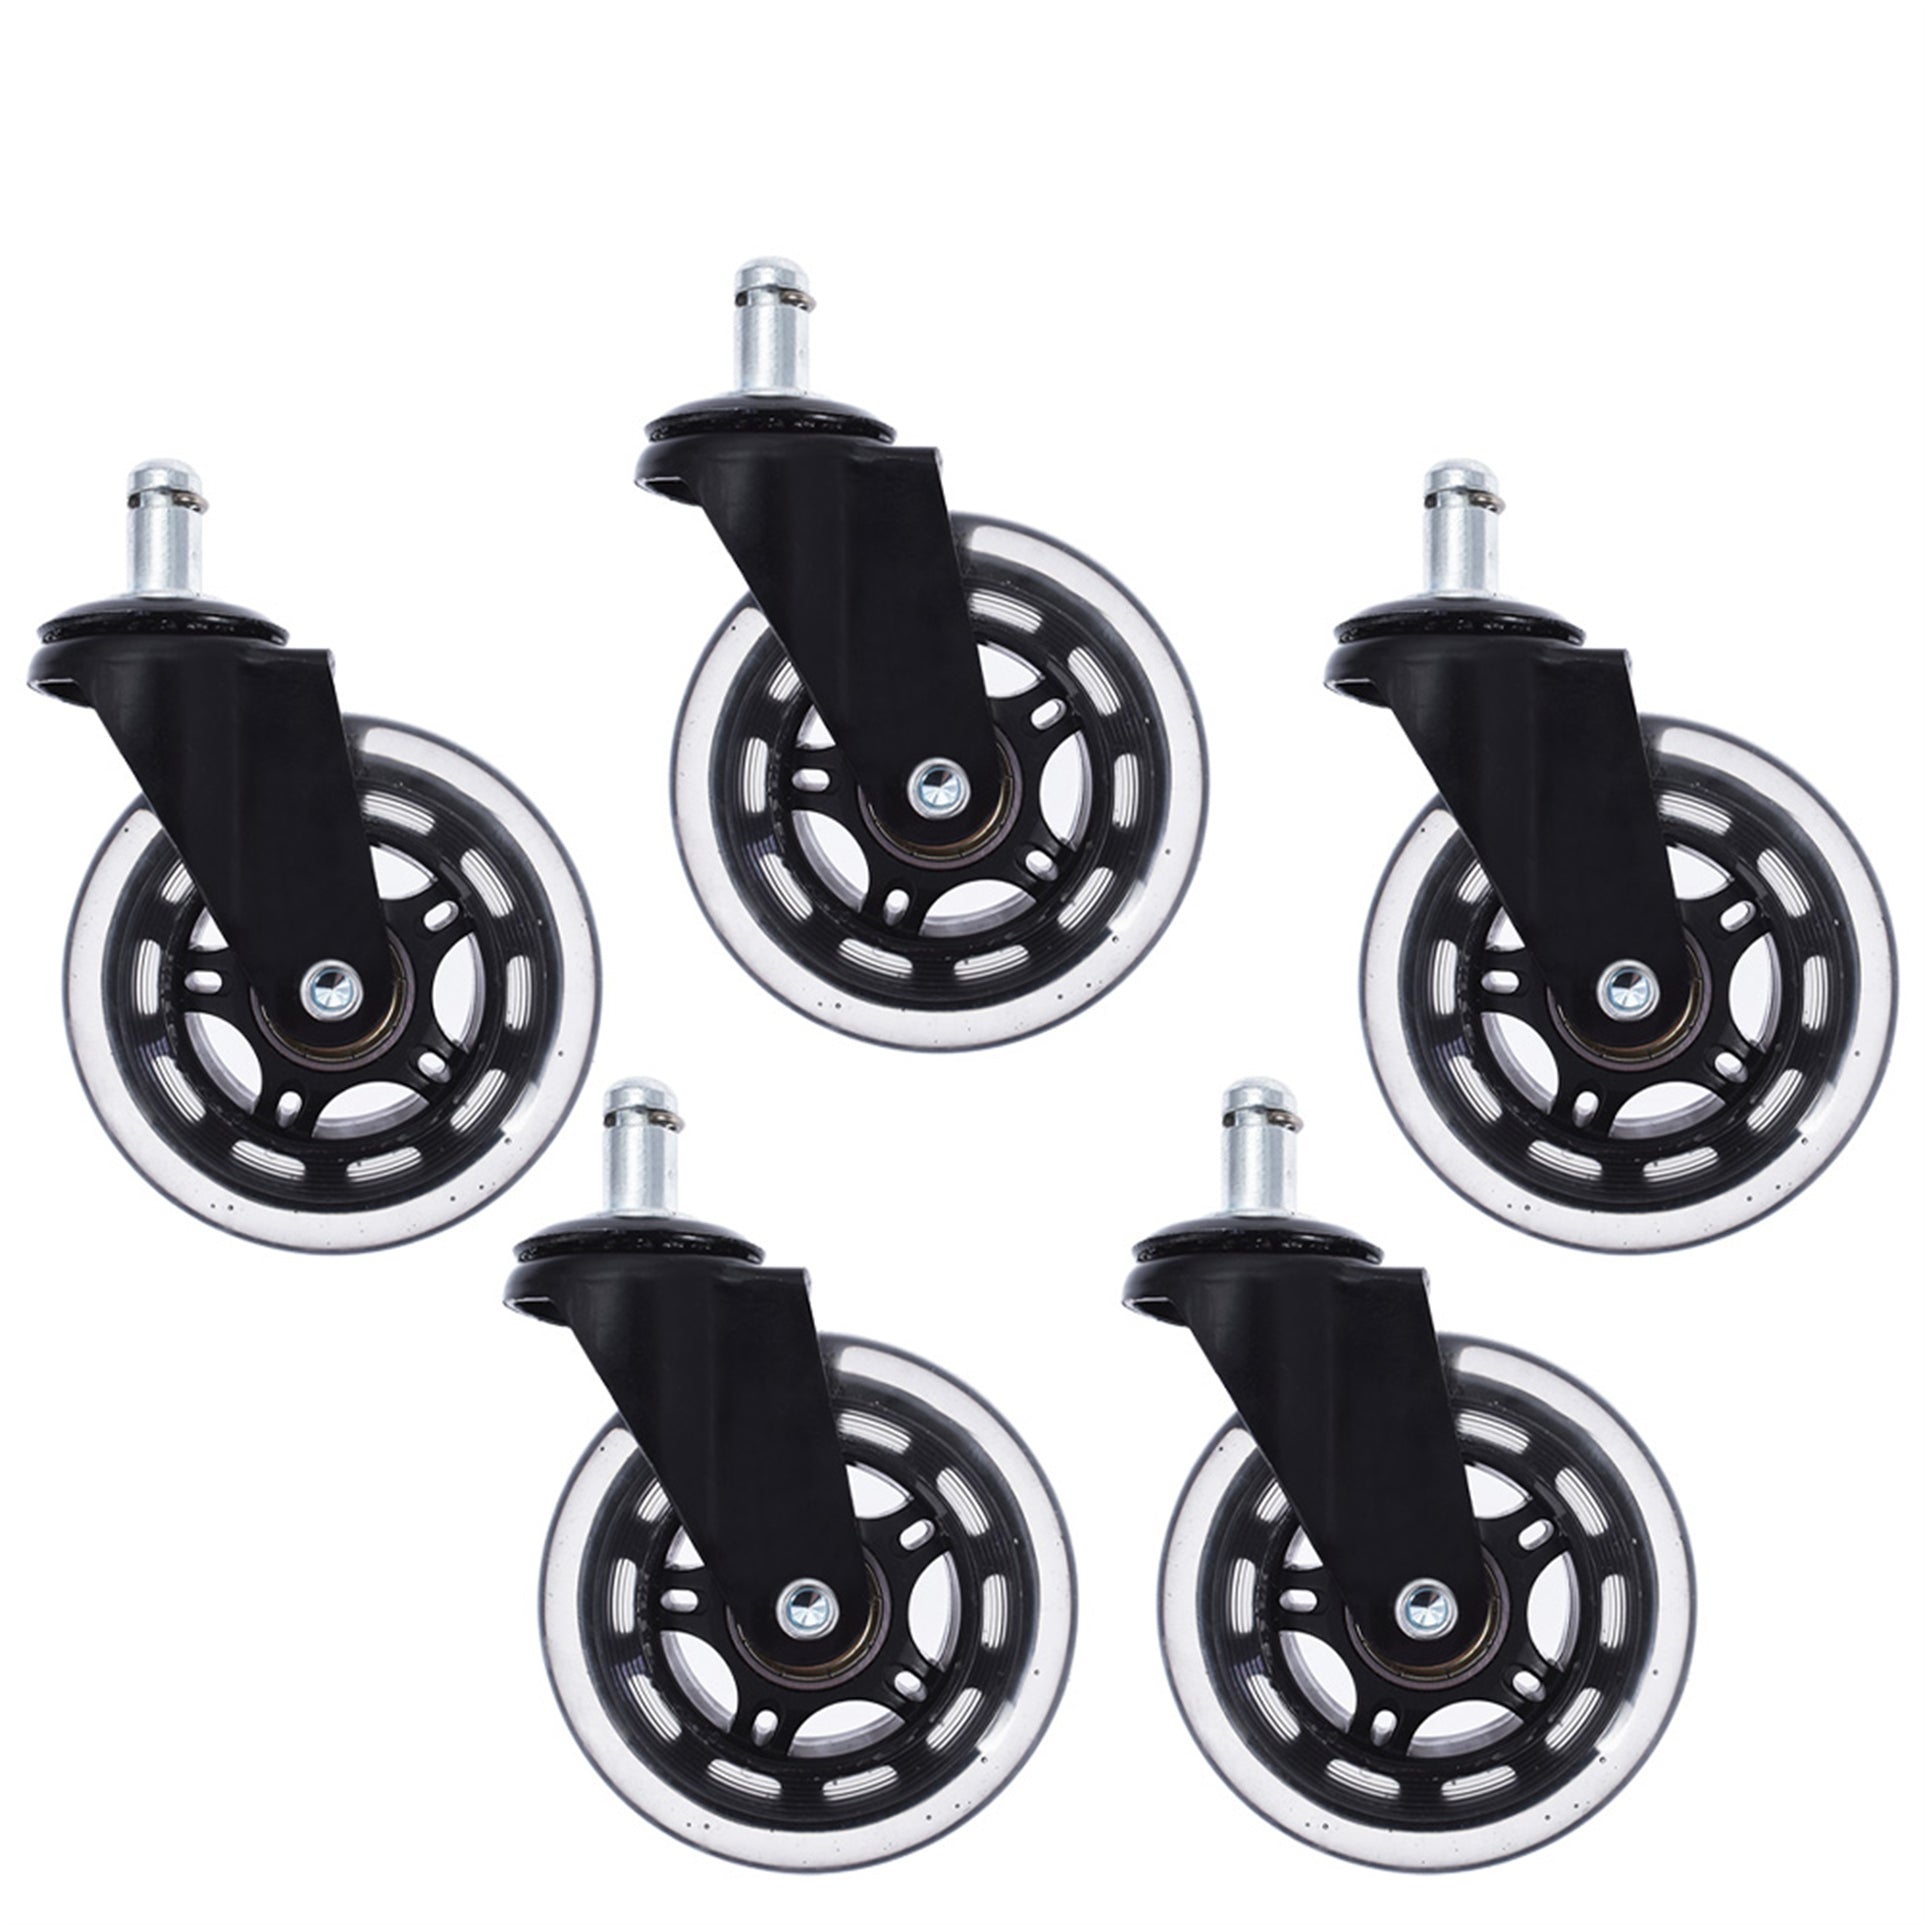 findmall 5Pcs 3 Inch Heavy Duty Office Chair Caster Wheels Rubber Swivel Wheels Replacement Casters FINDMALLPARTS